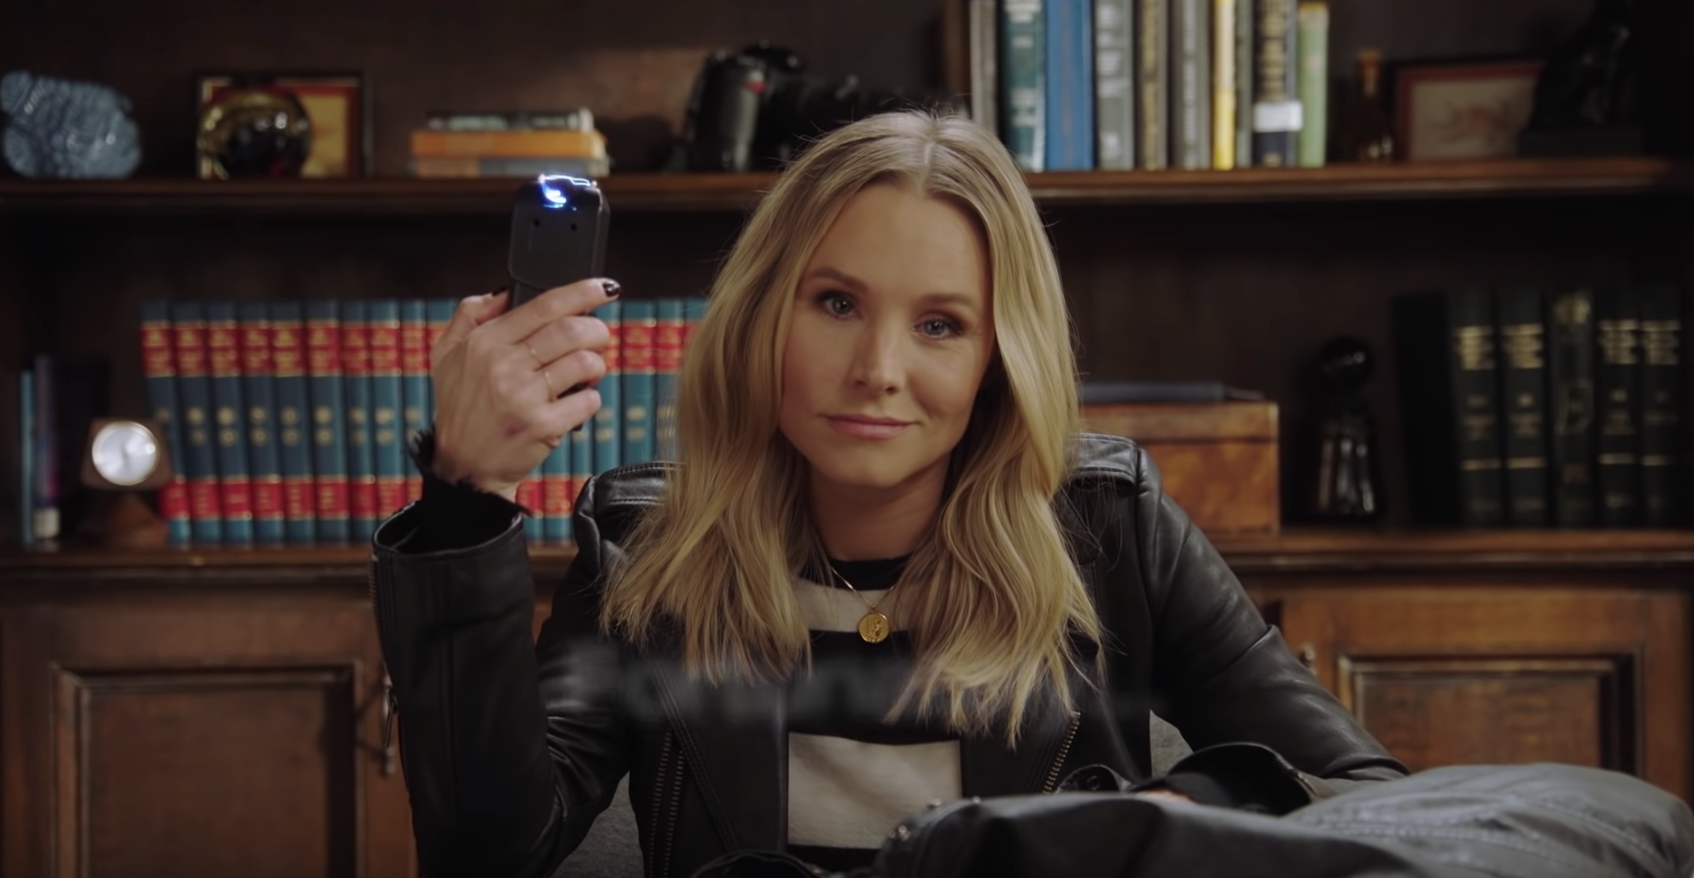 Kristen Bell is set to reprise her role in a Veronica Mars reboot